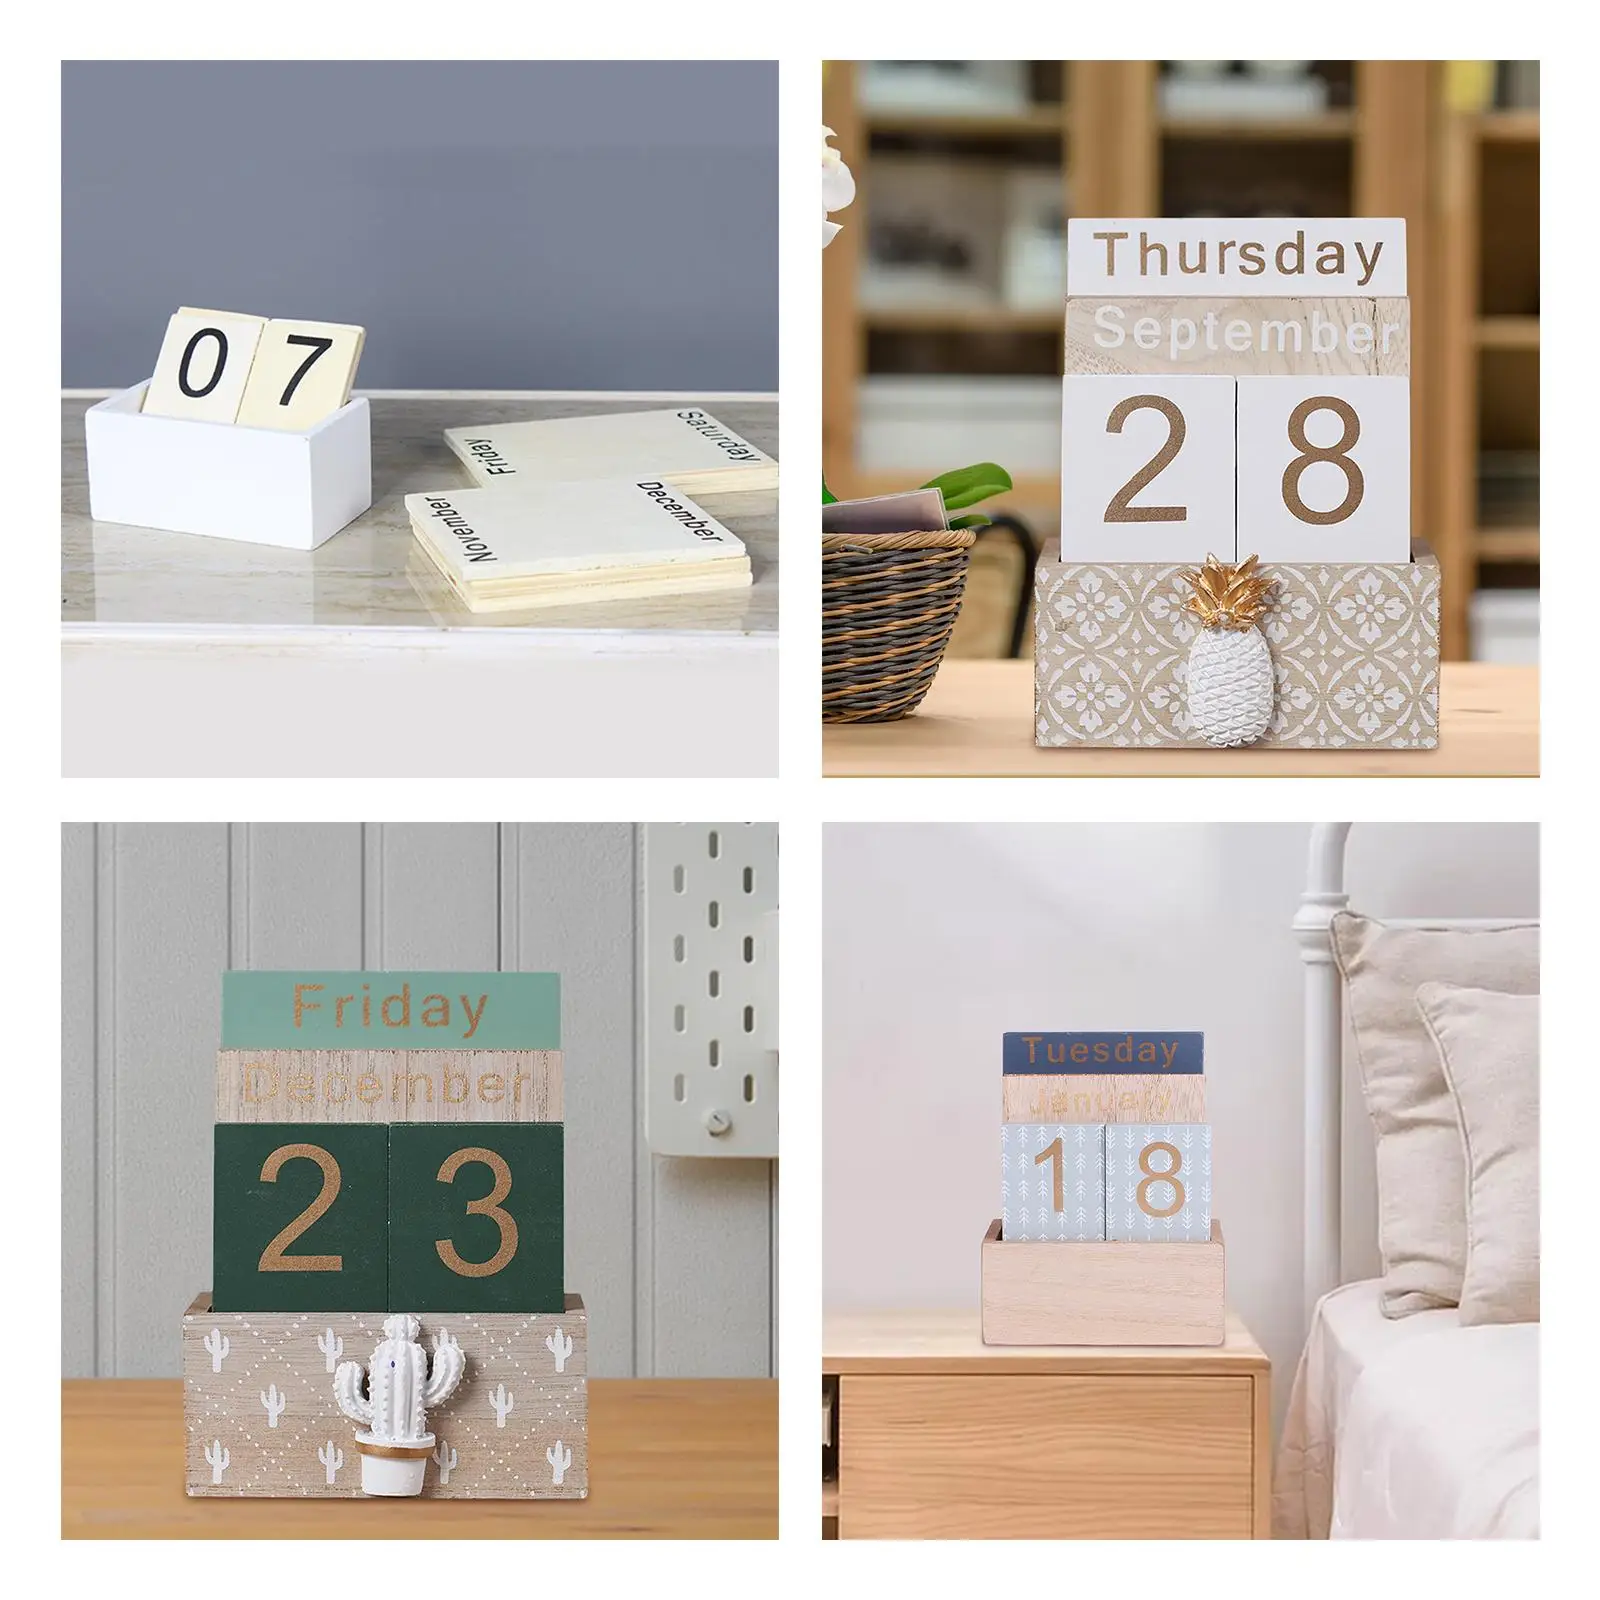 Creative Calendar Perpetual Wooden Chic Antique Style for Living Room Bedroom Indoor Hotel Home